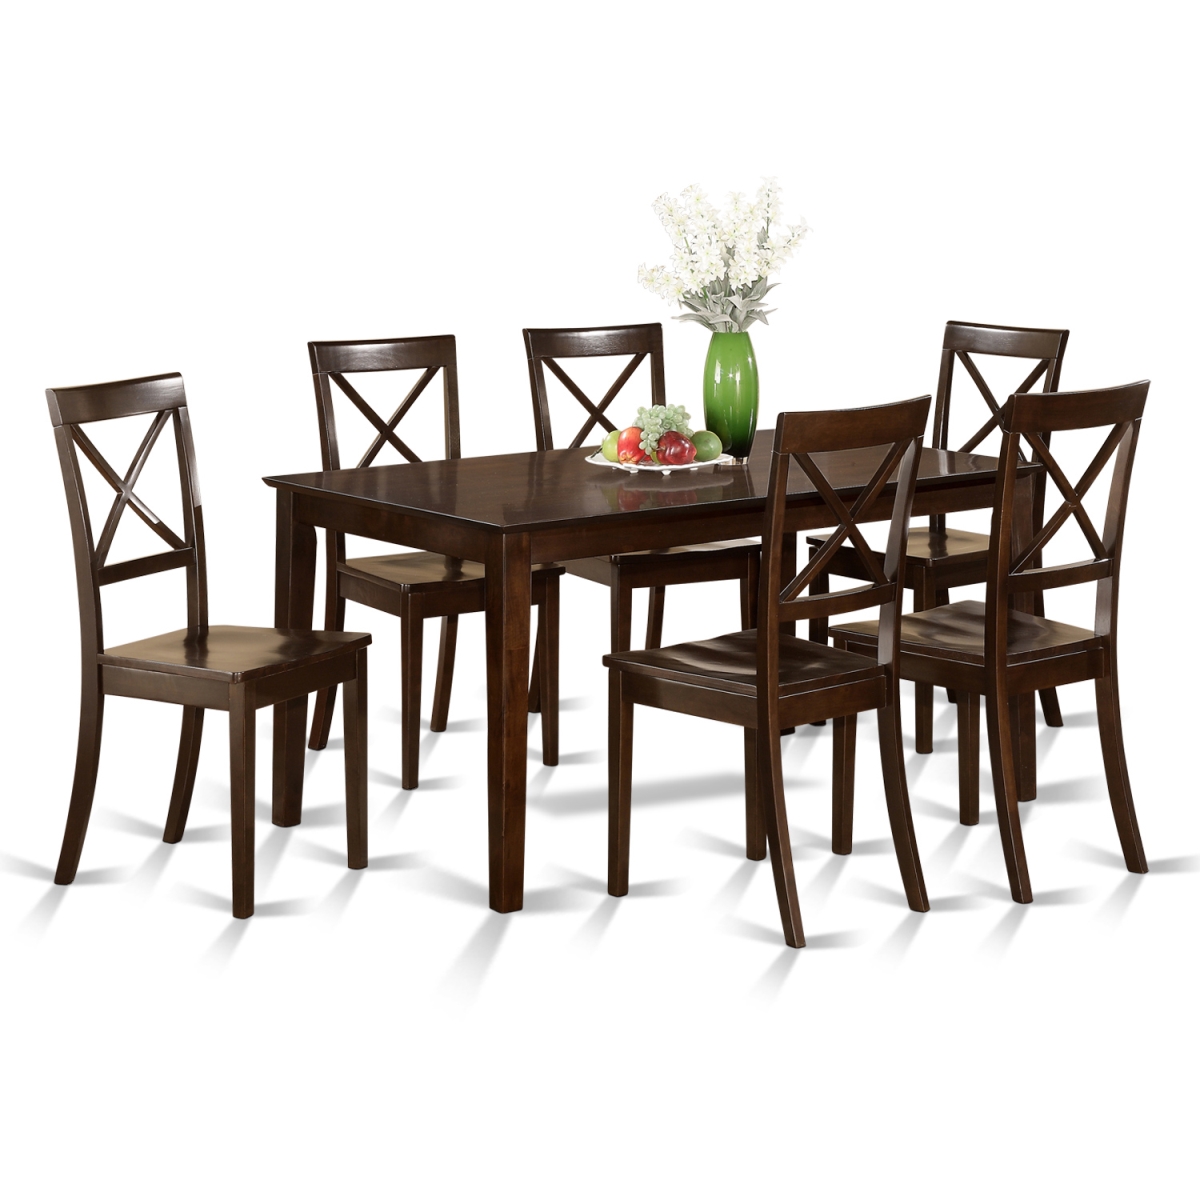 Picture of East West Furniture CABO7S-CAP-W Dining Set - Table & 6 Wood Seat Chairs - 7 Piece